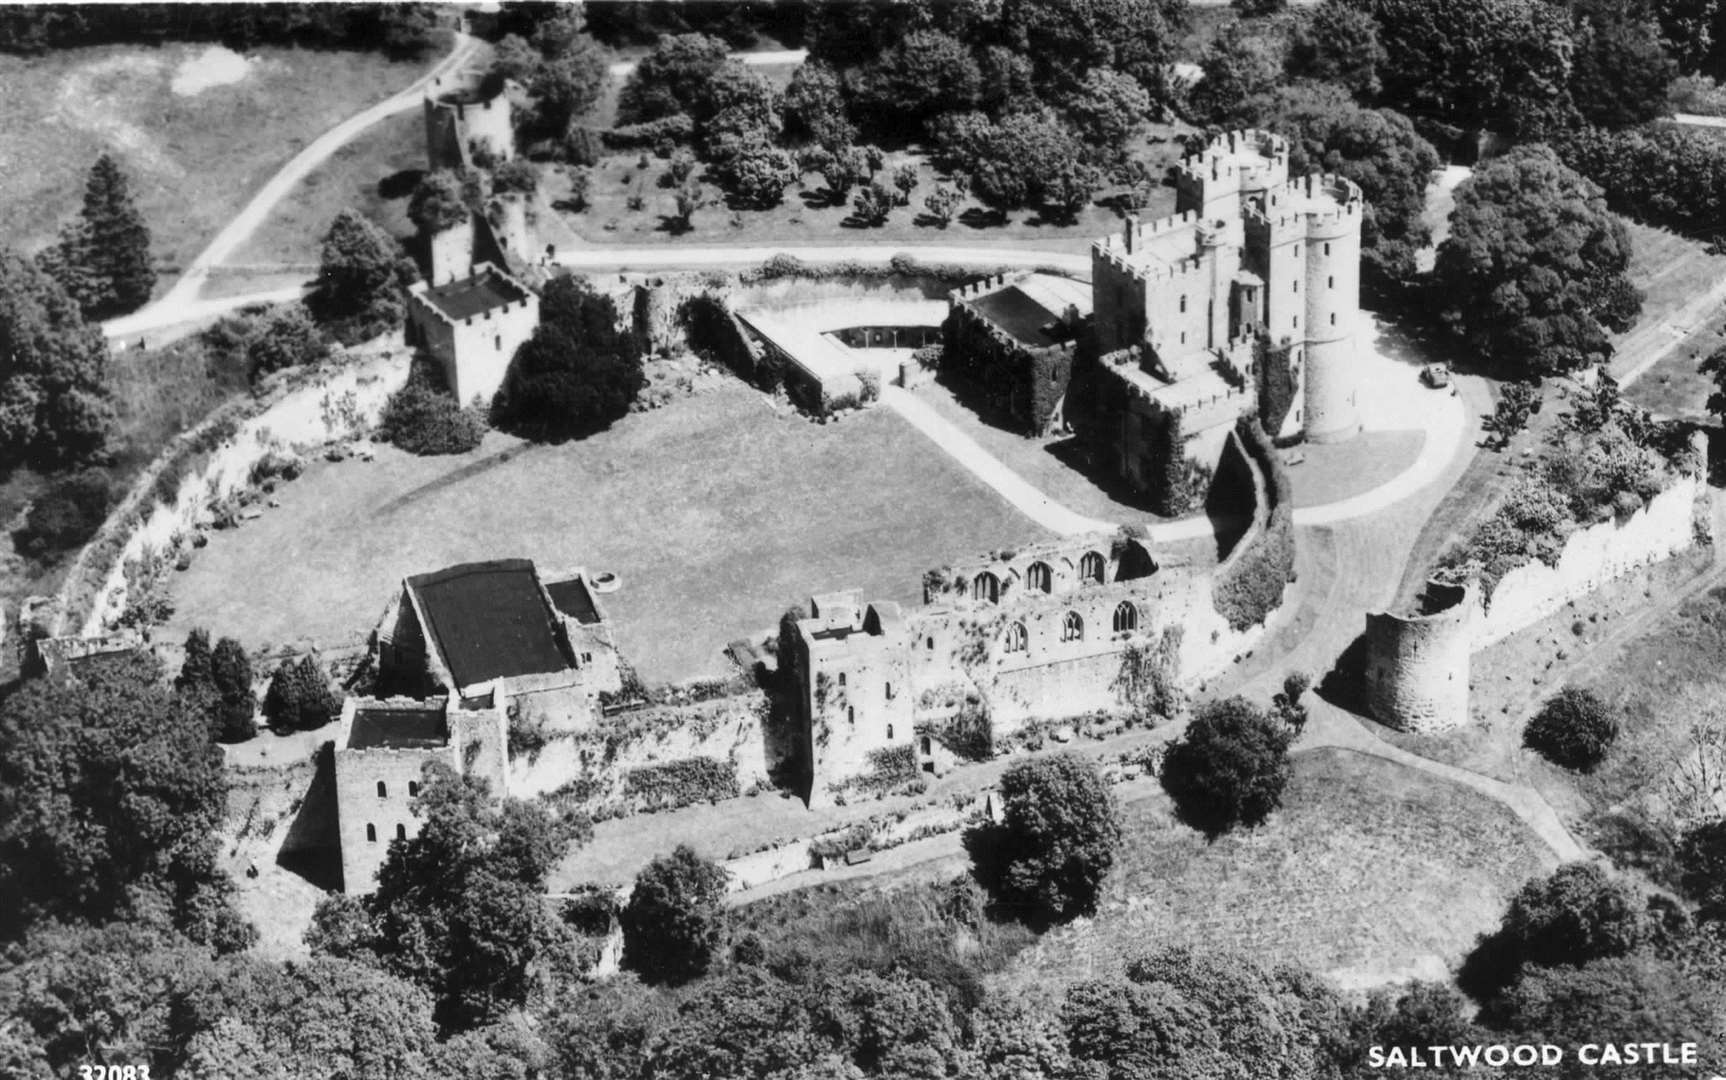 An aerial shot of Saltwood Castle. Our archive states this shot is from a Saltwood Castle Christmas card, dated 1959